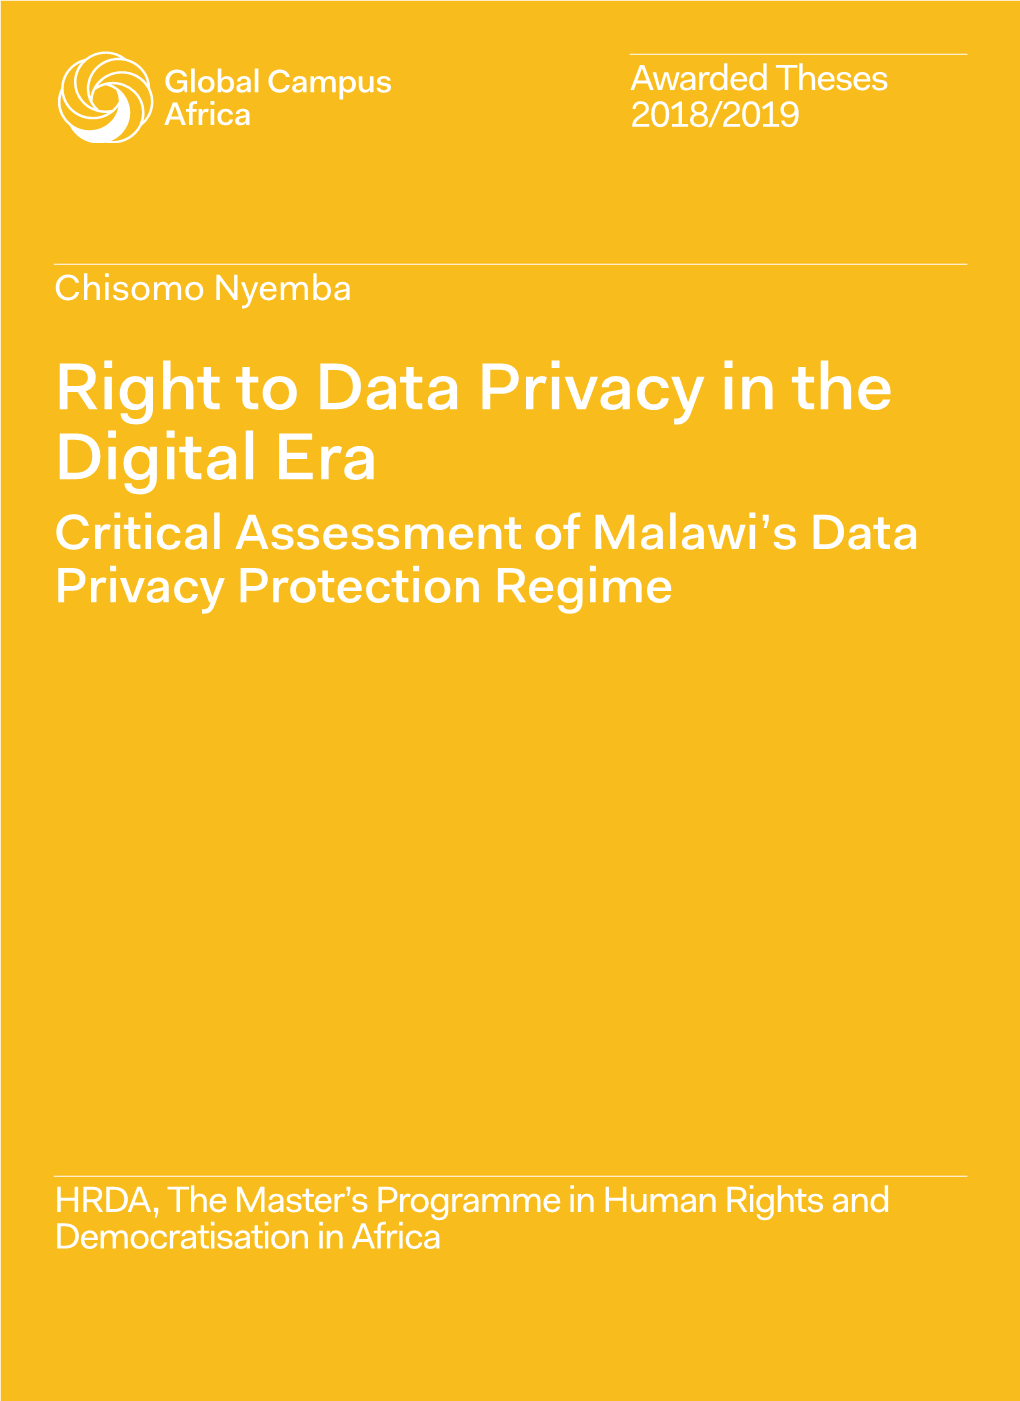 Right to Data Privacy in the Digital Era Critical Assessment of Malawi’S Data Privacy Protection Regime